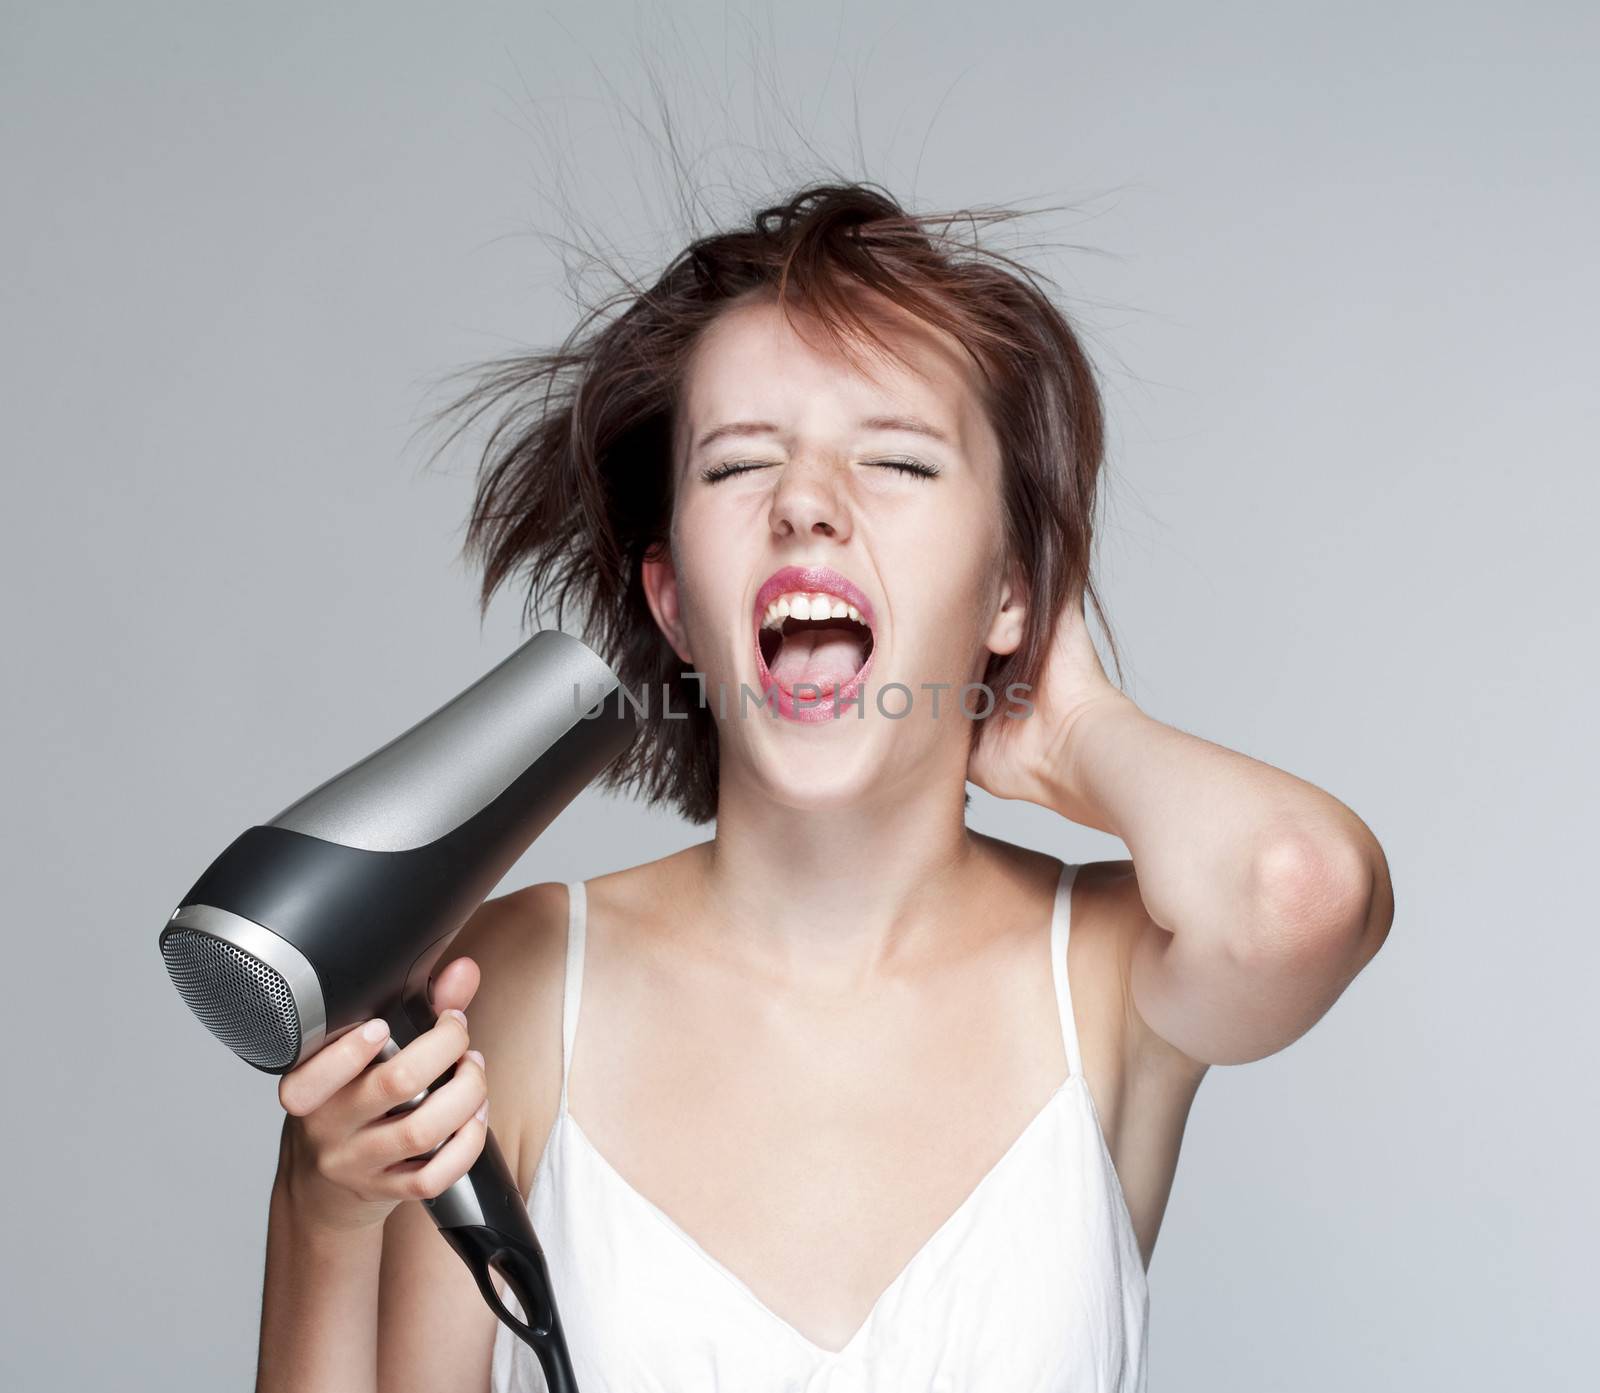 girl with hairdryer by courtyardpix